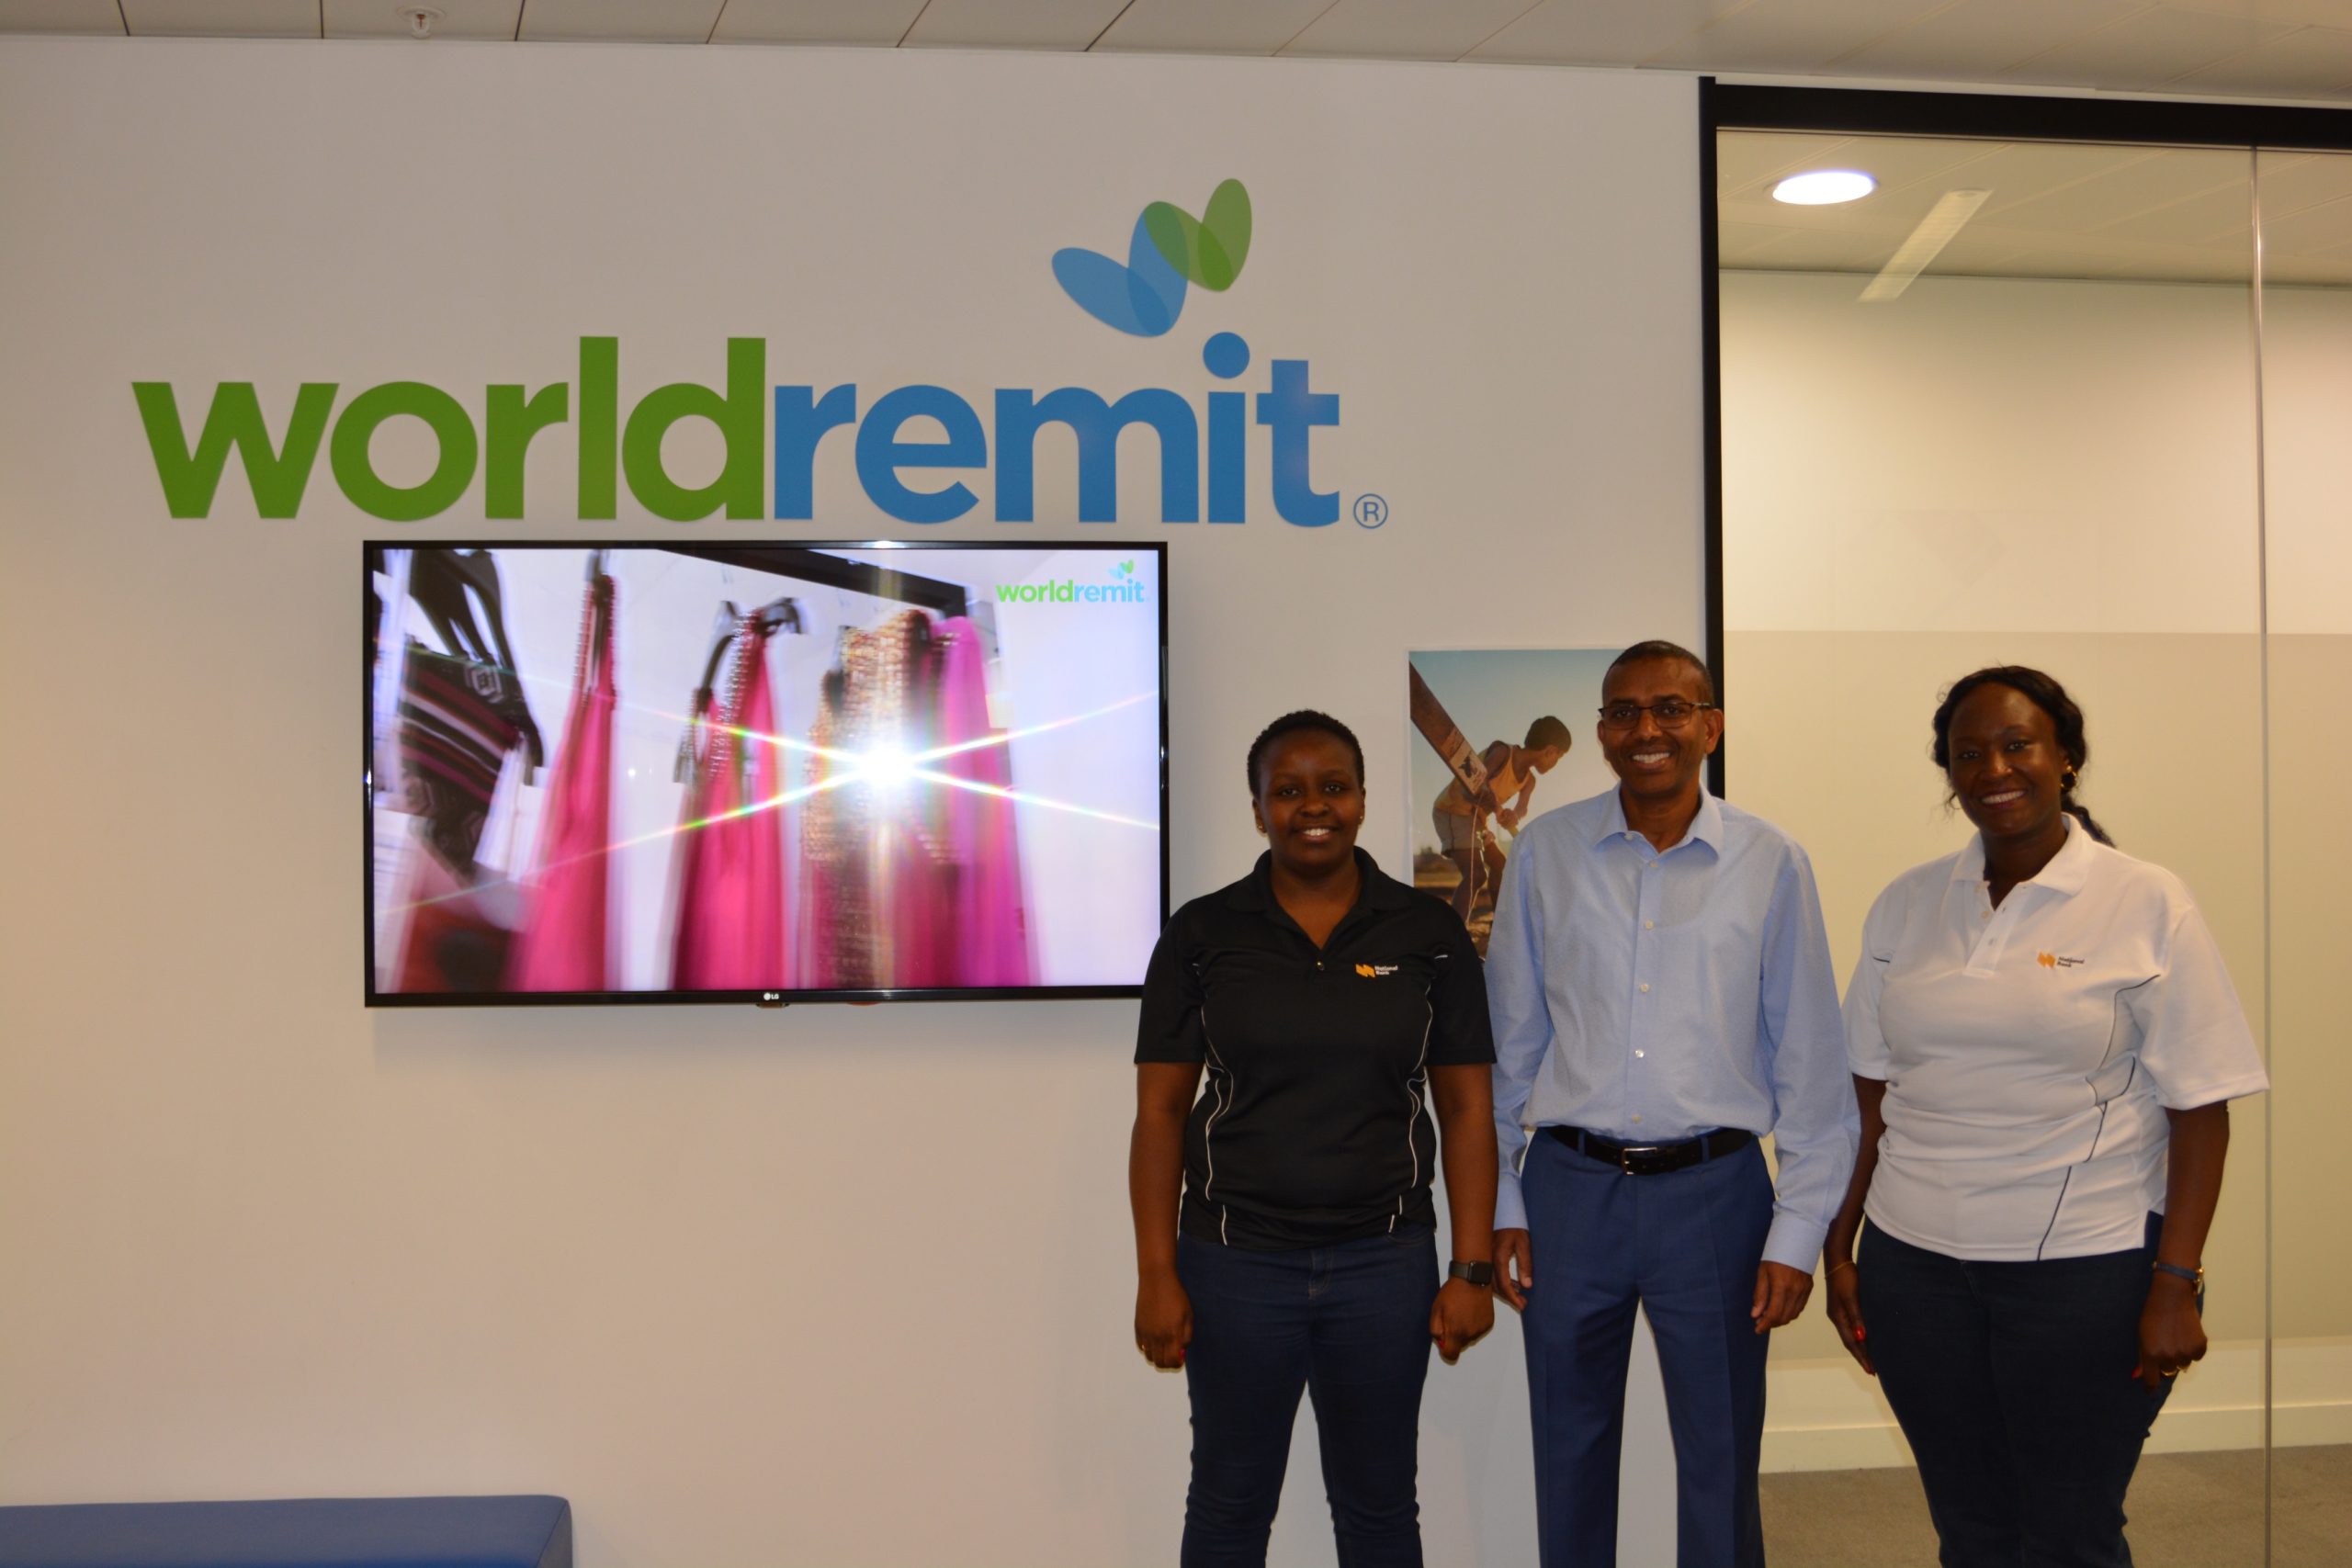 National Bank Head of Premium Banking, Ms. Alice Kimuhu (R) and Manager, Diaspora Banking, Ms. Caroline Mugo (L) with World Remit’s Founder and CEO, Mr. Ismail Ahmed (C) at the World Remit Headquarters in London